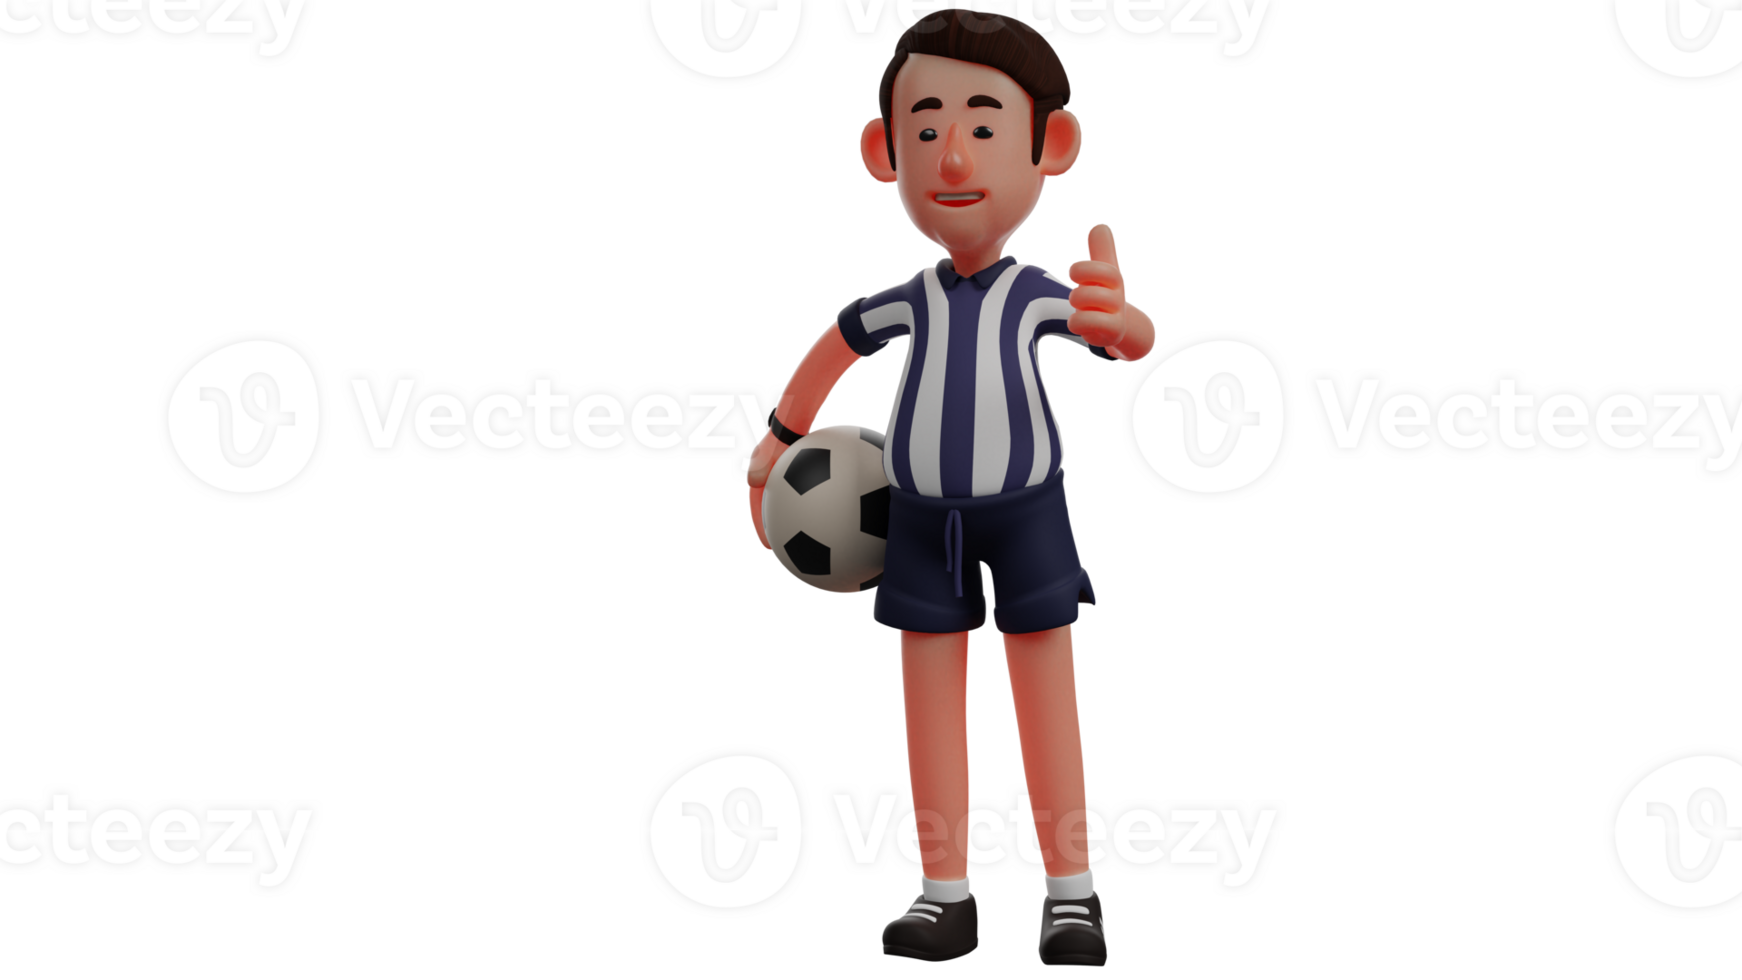 3D illustration. Handsome Referee 3D Cartoon Character. The referee brings the ball to be used in the match. The referee gave his thumbs up to the ball player who passed him. 3D Cartoon Character png